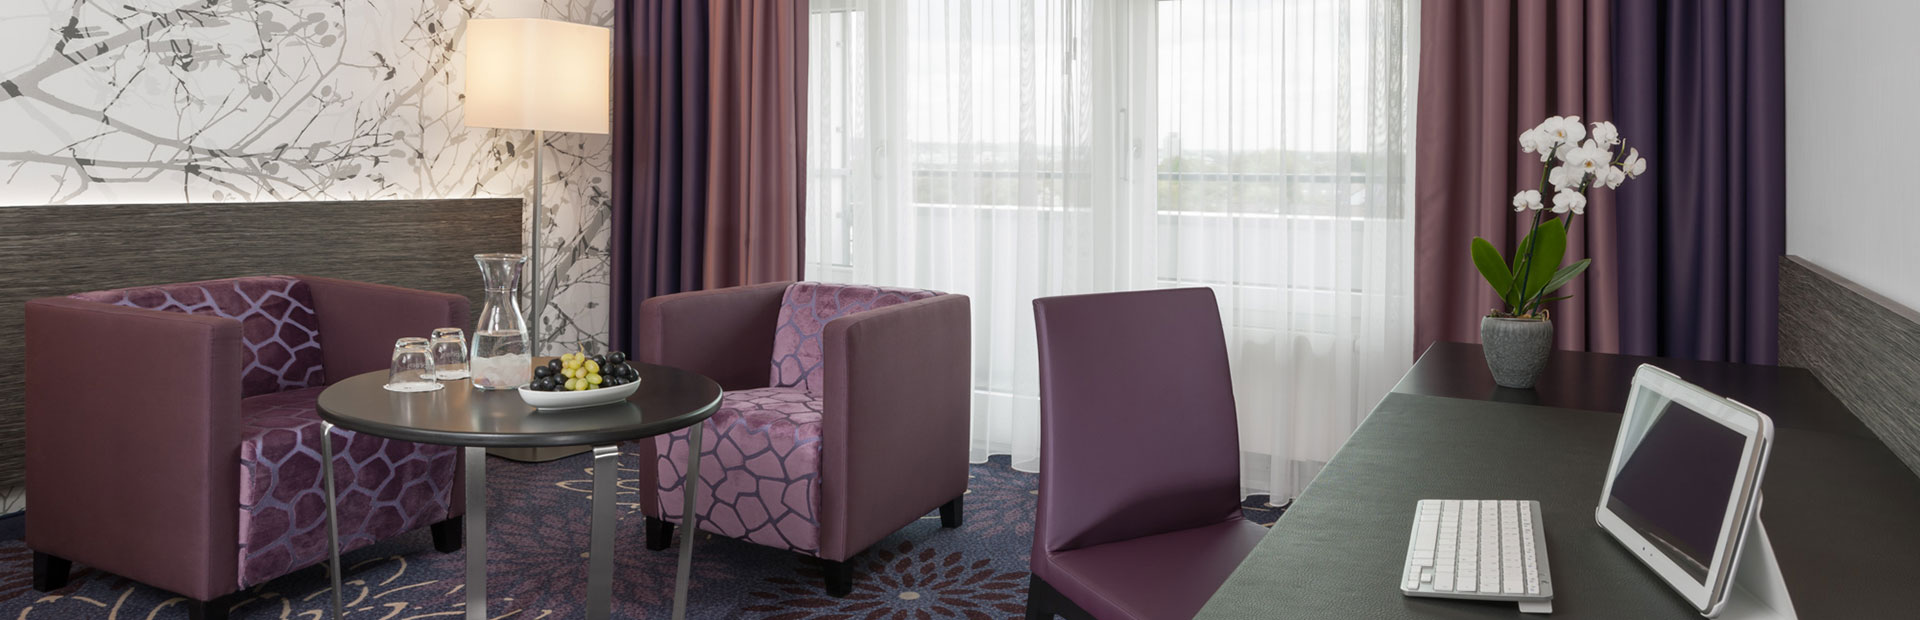 Comfortable standard room with stylish purple seating are